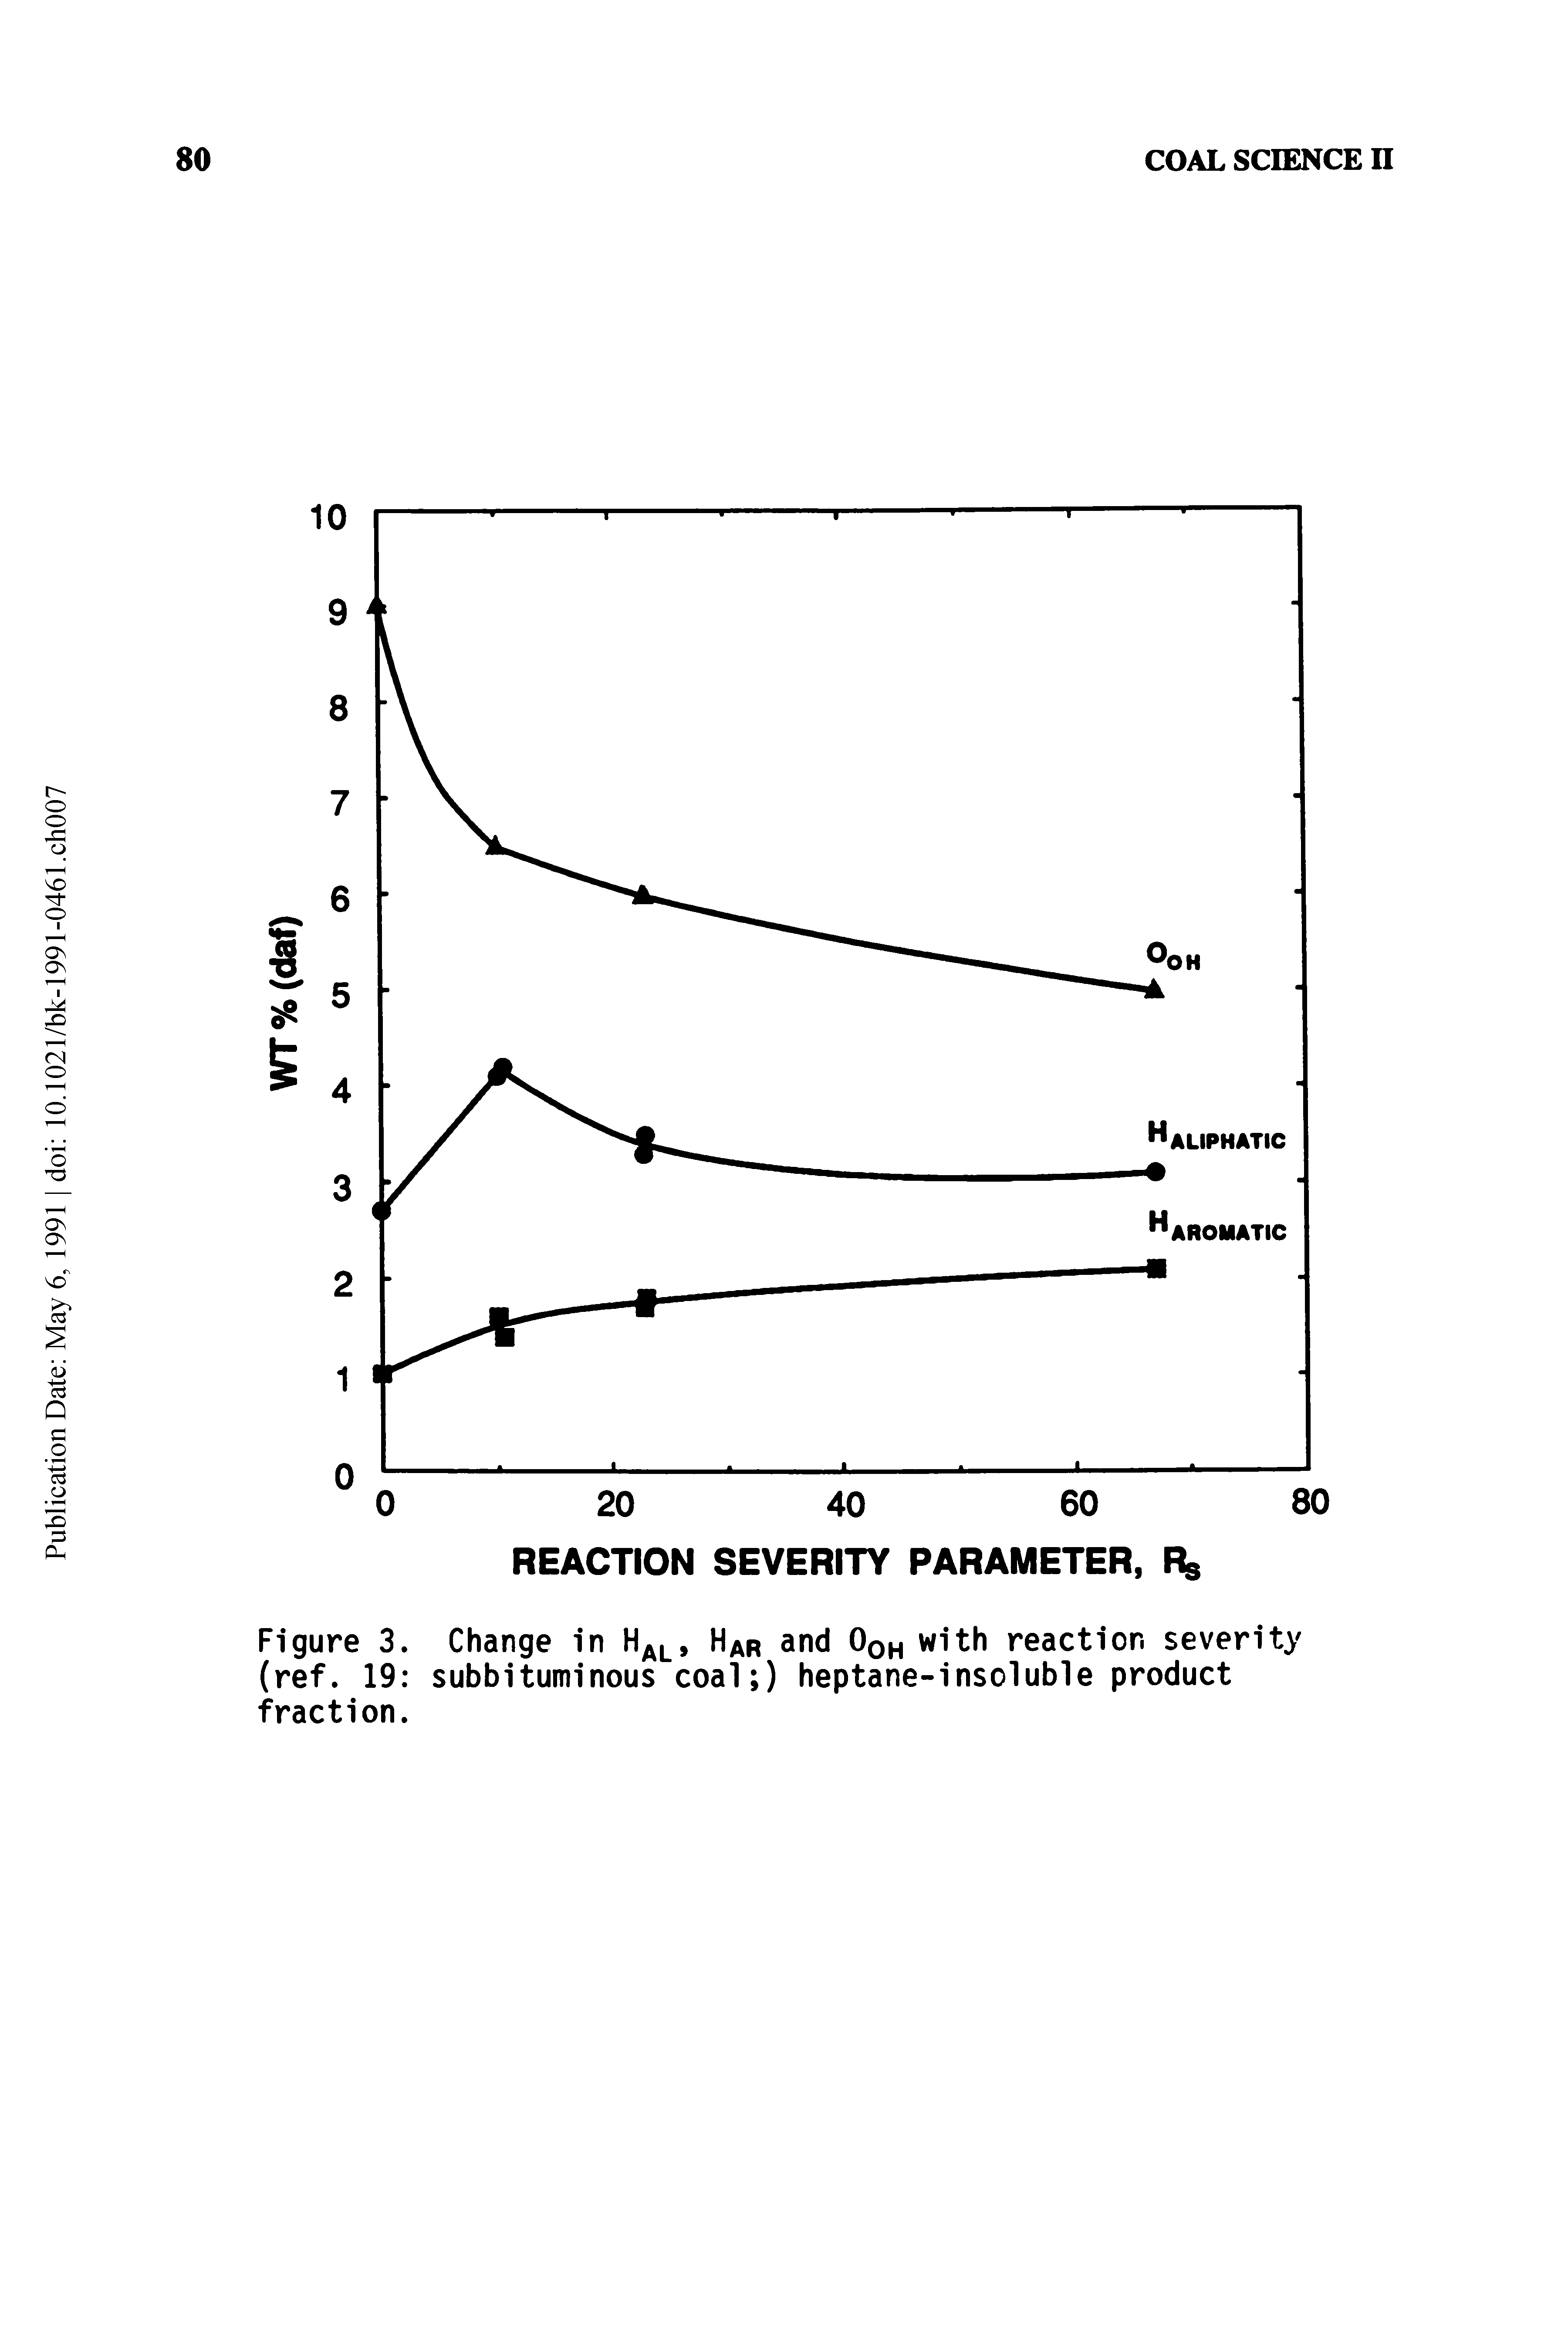 Figure 3. Change in ar and Oqh with reaction severity (ref. 19 subbituminous coal ) heptane-insoluble product fraction.